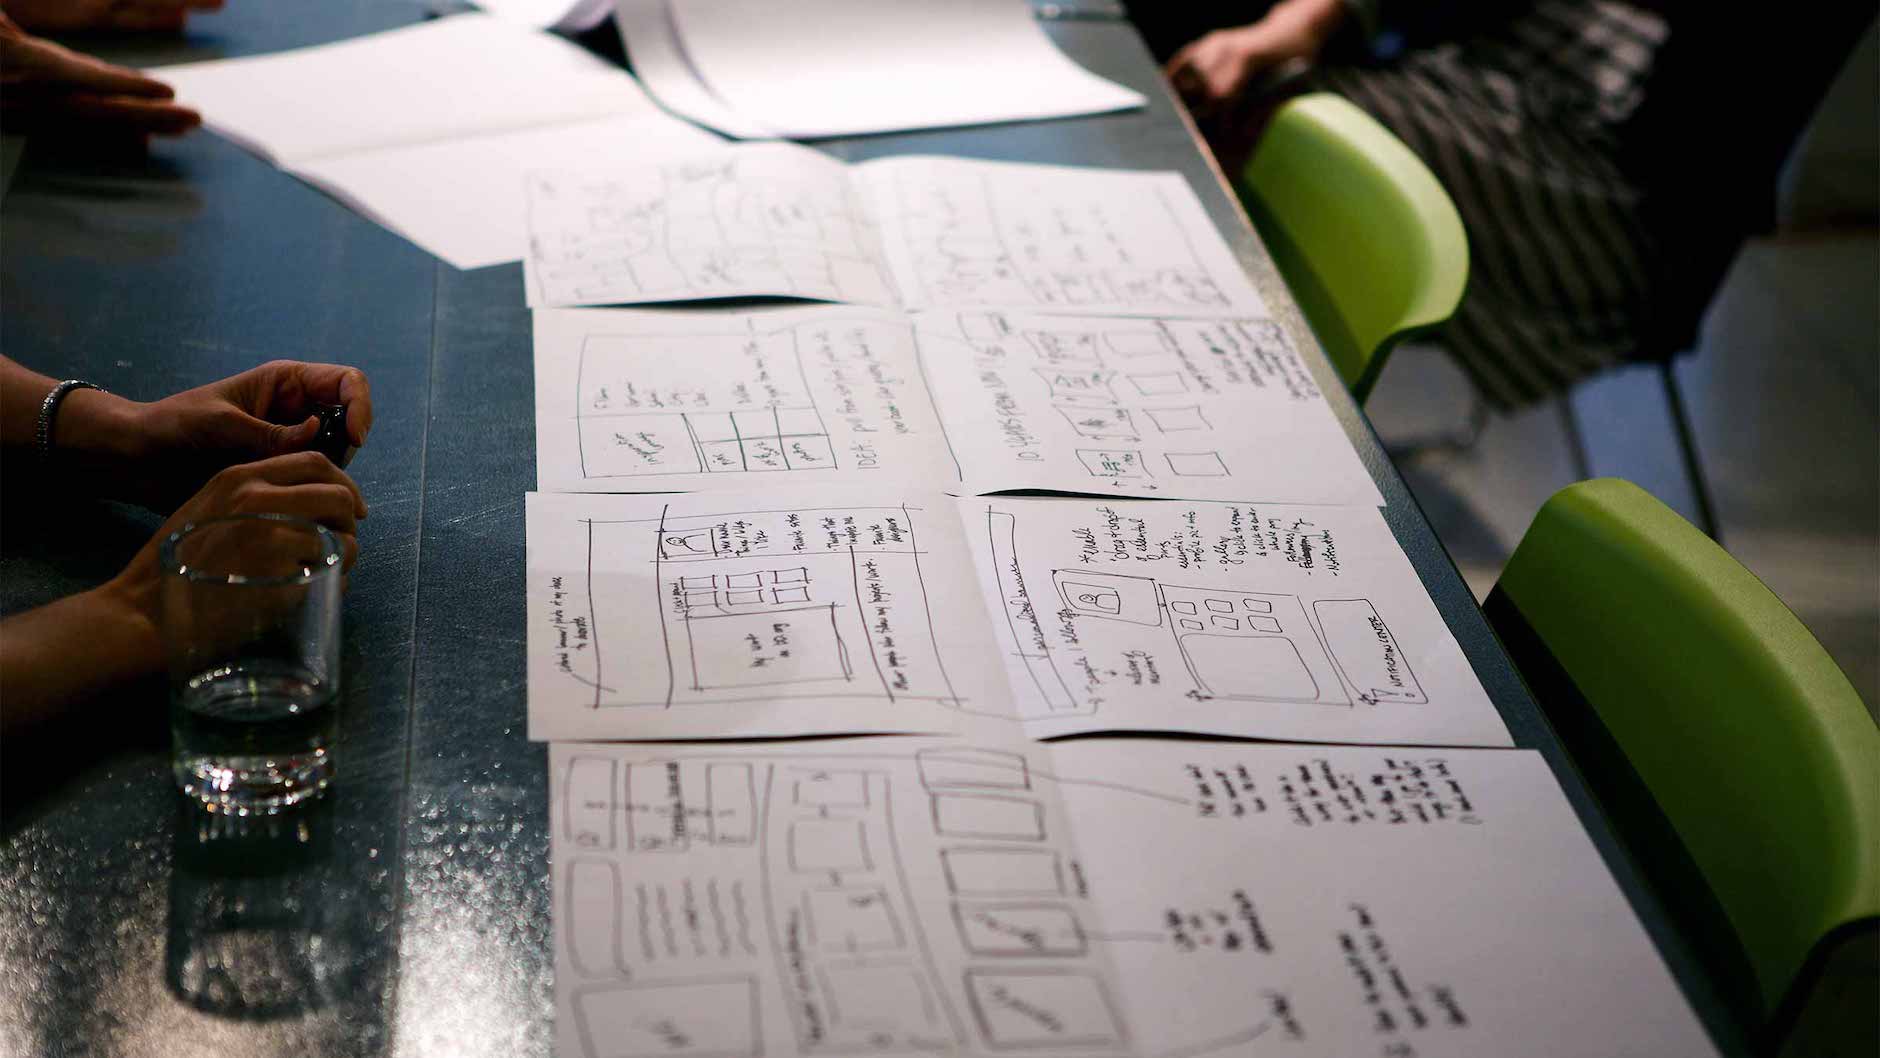 A collection of sketches lined up on a desk to illustrate information architecture in UX design